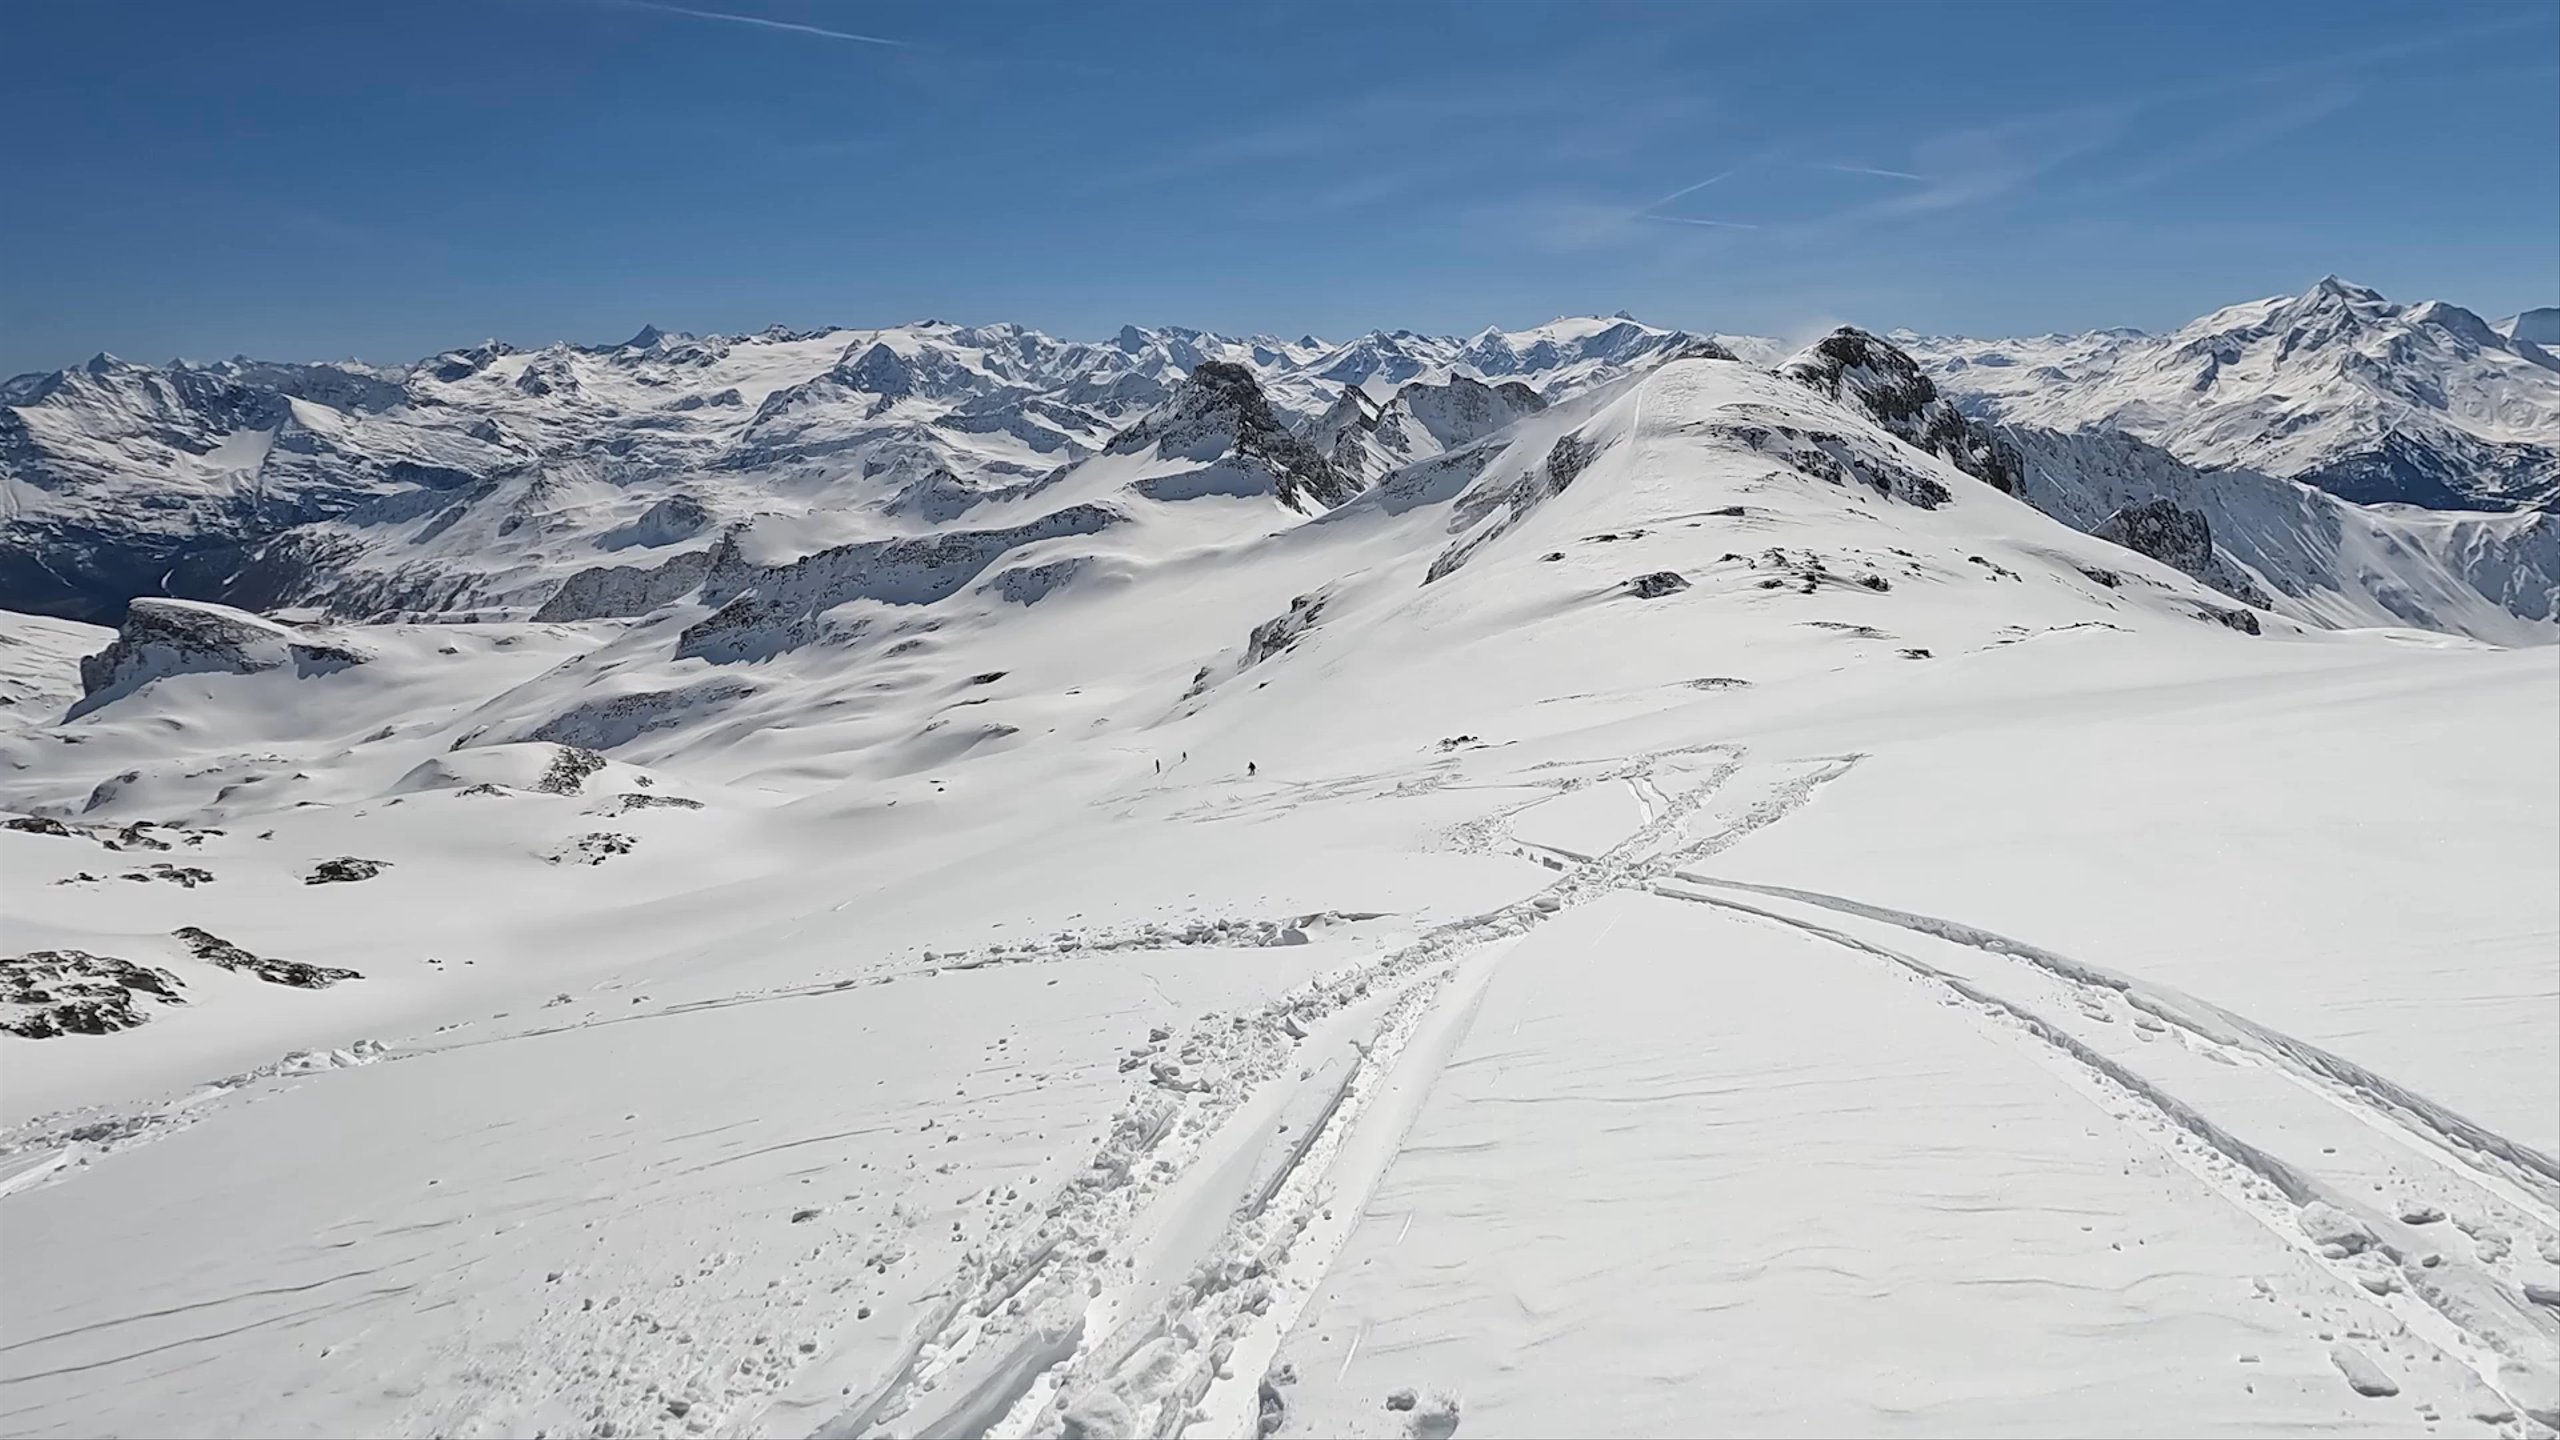 POV video of person skiing down mountain in French Alps